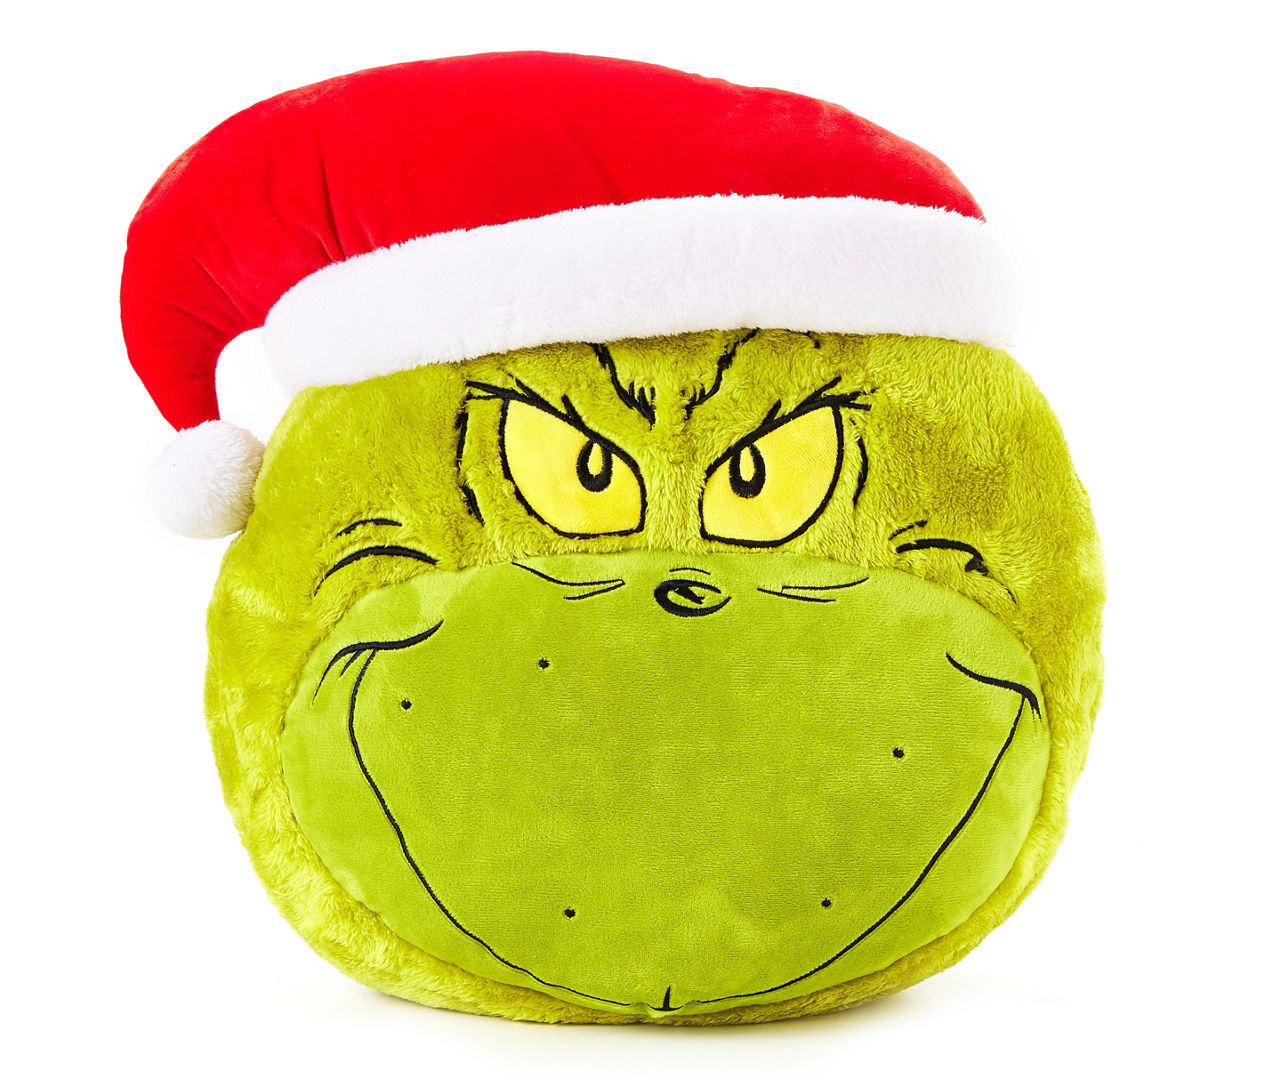 Dr. Seuss’s The Grinch Who Stole Christmas Plush Pillow, 16in